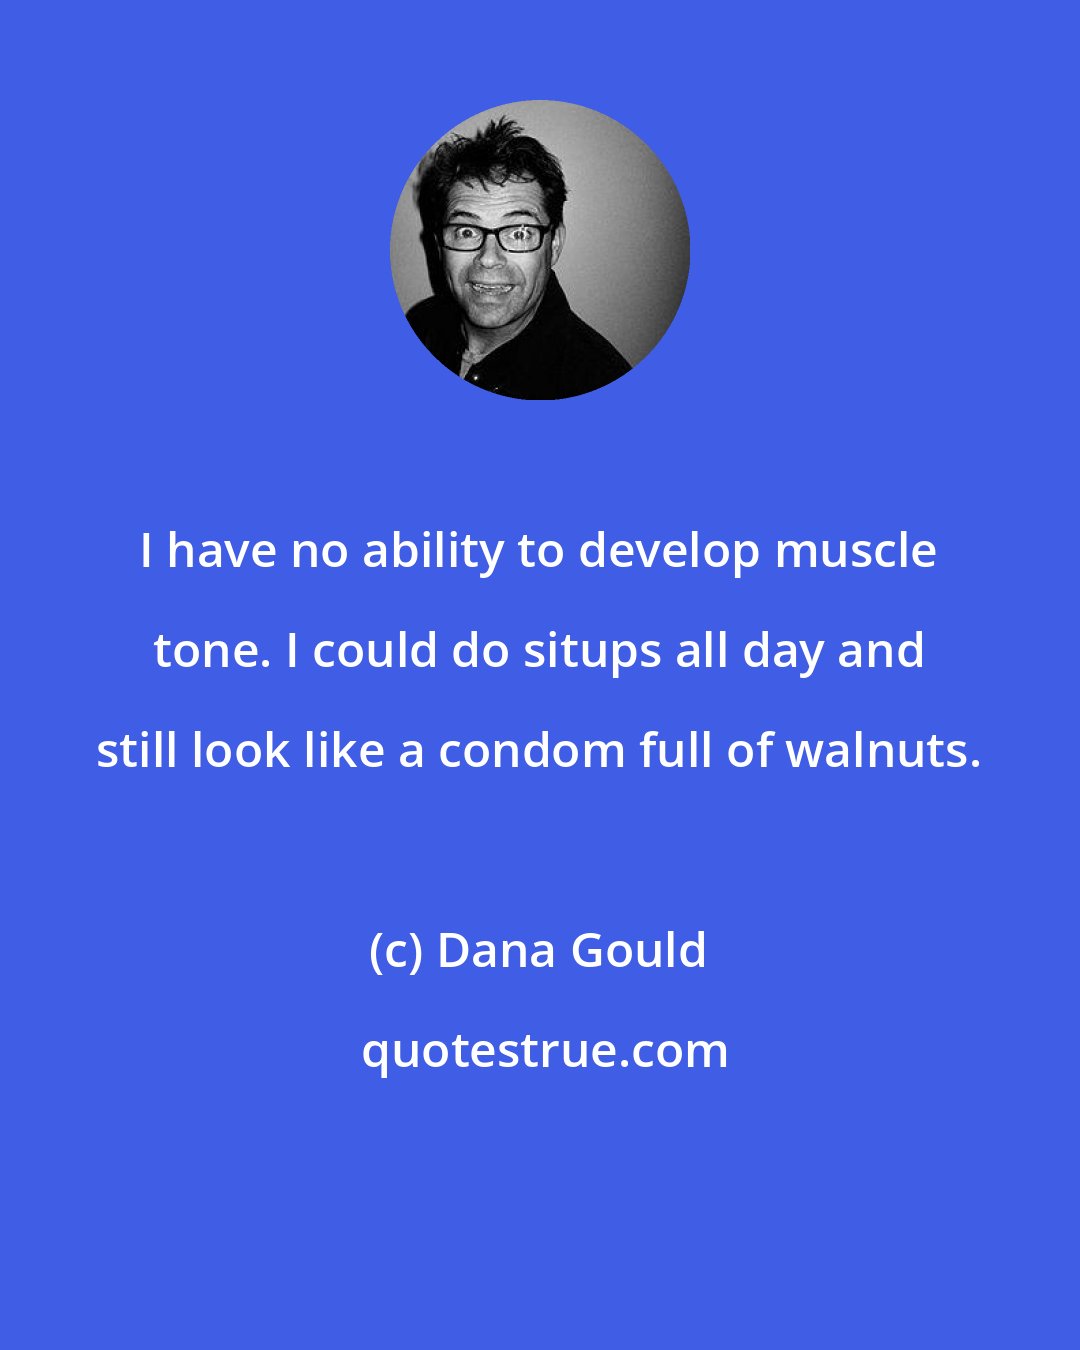 Dana Gould: I have no ability to develop muscle tone. I could do situps all day and still look like a condom full of walnuts.